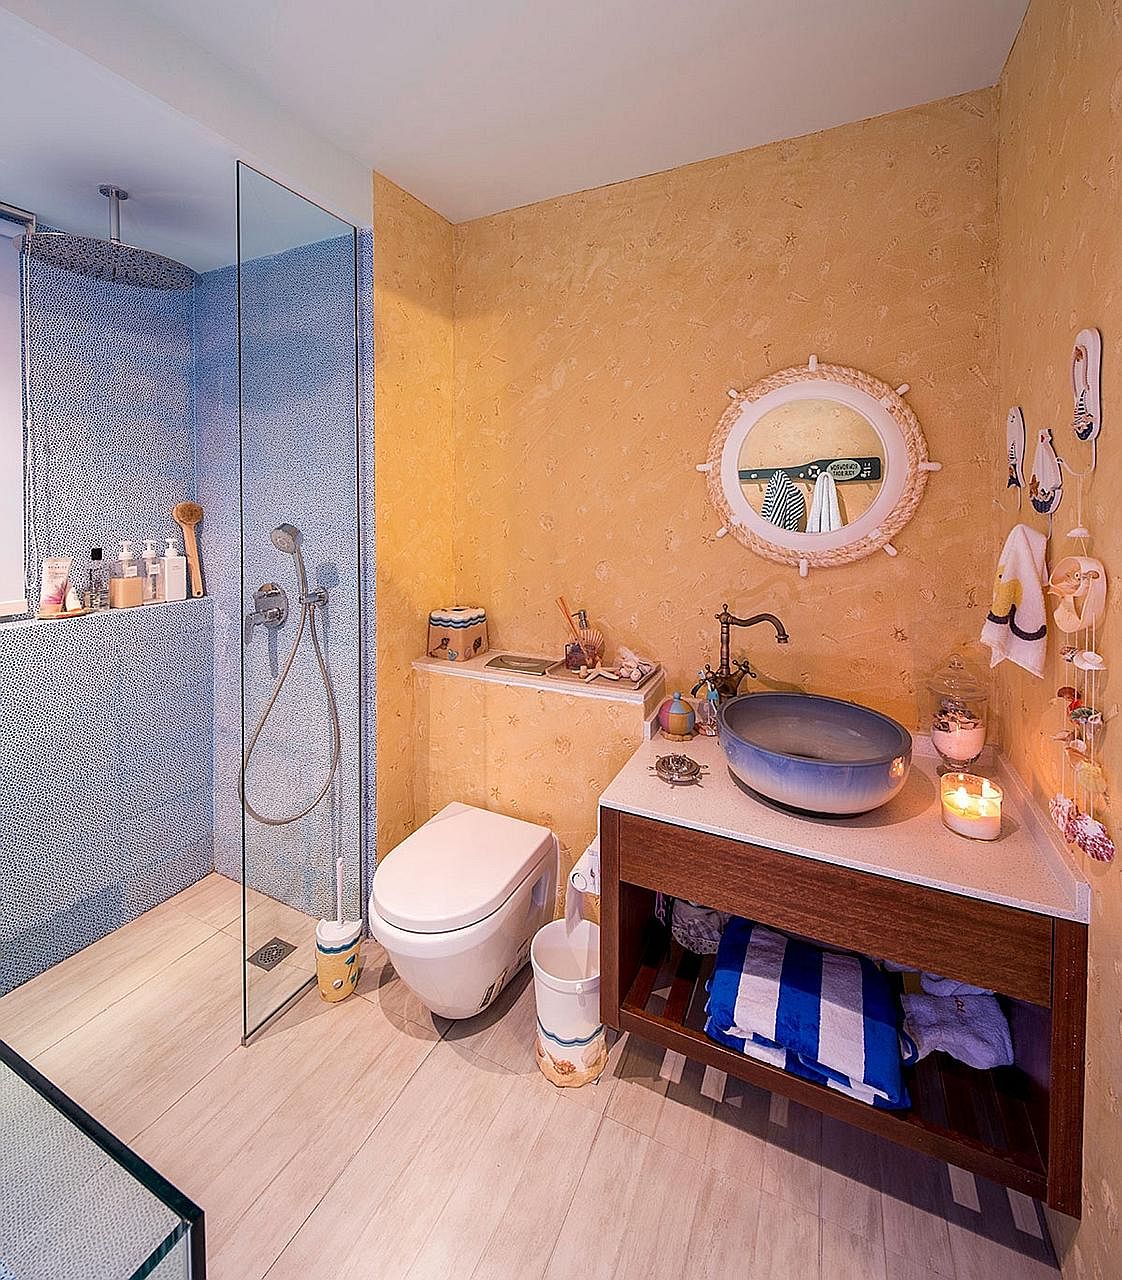 Blue tiles, to replicate the hues of the sky and the ocean, as well as sand-textured walls re-create the Maldivian beach villa vibe in the master bathroom (above). Home owners Kenneth Tan and Jael Tan (both left) with their children, Odette, one, and